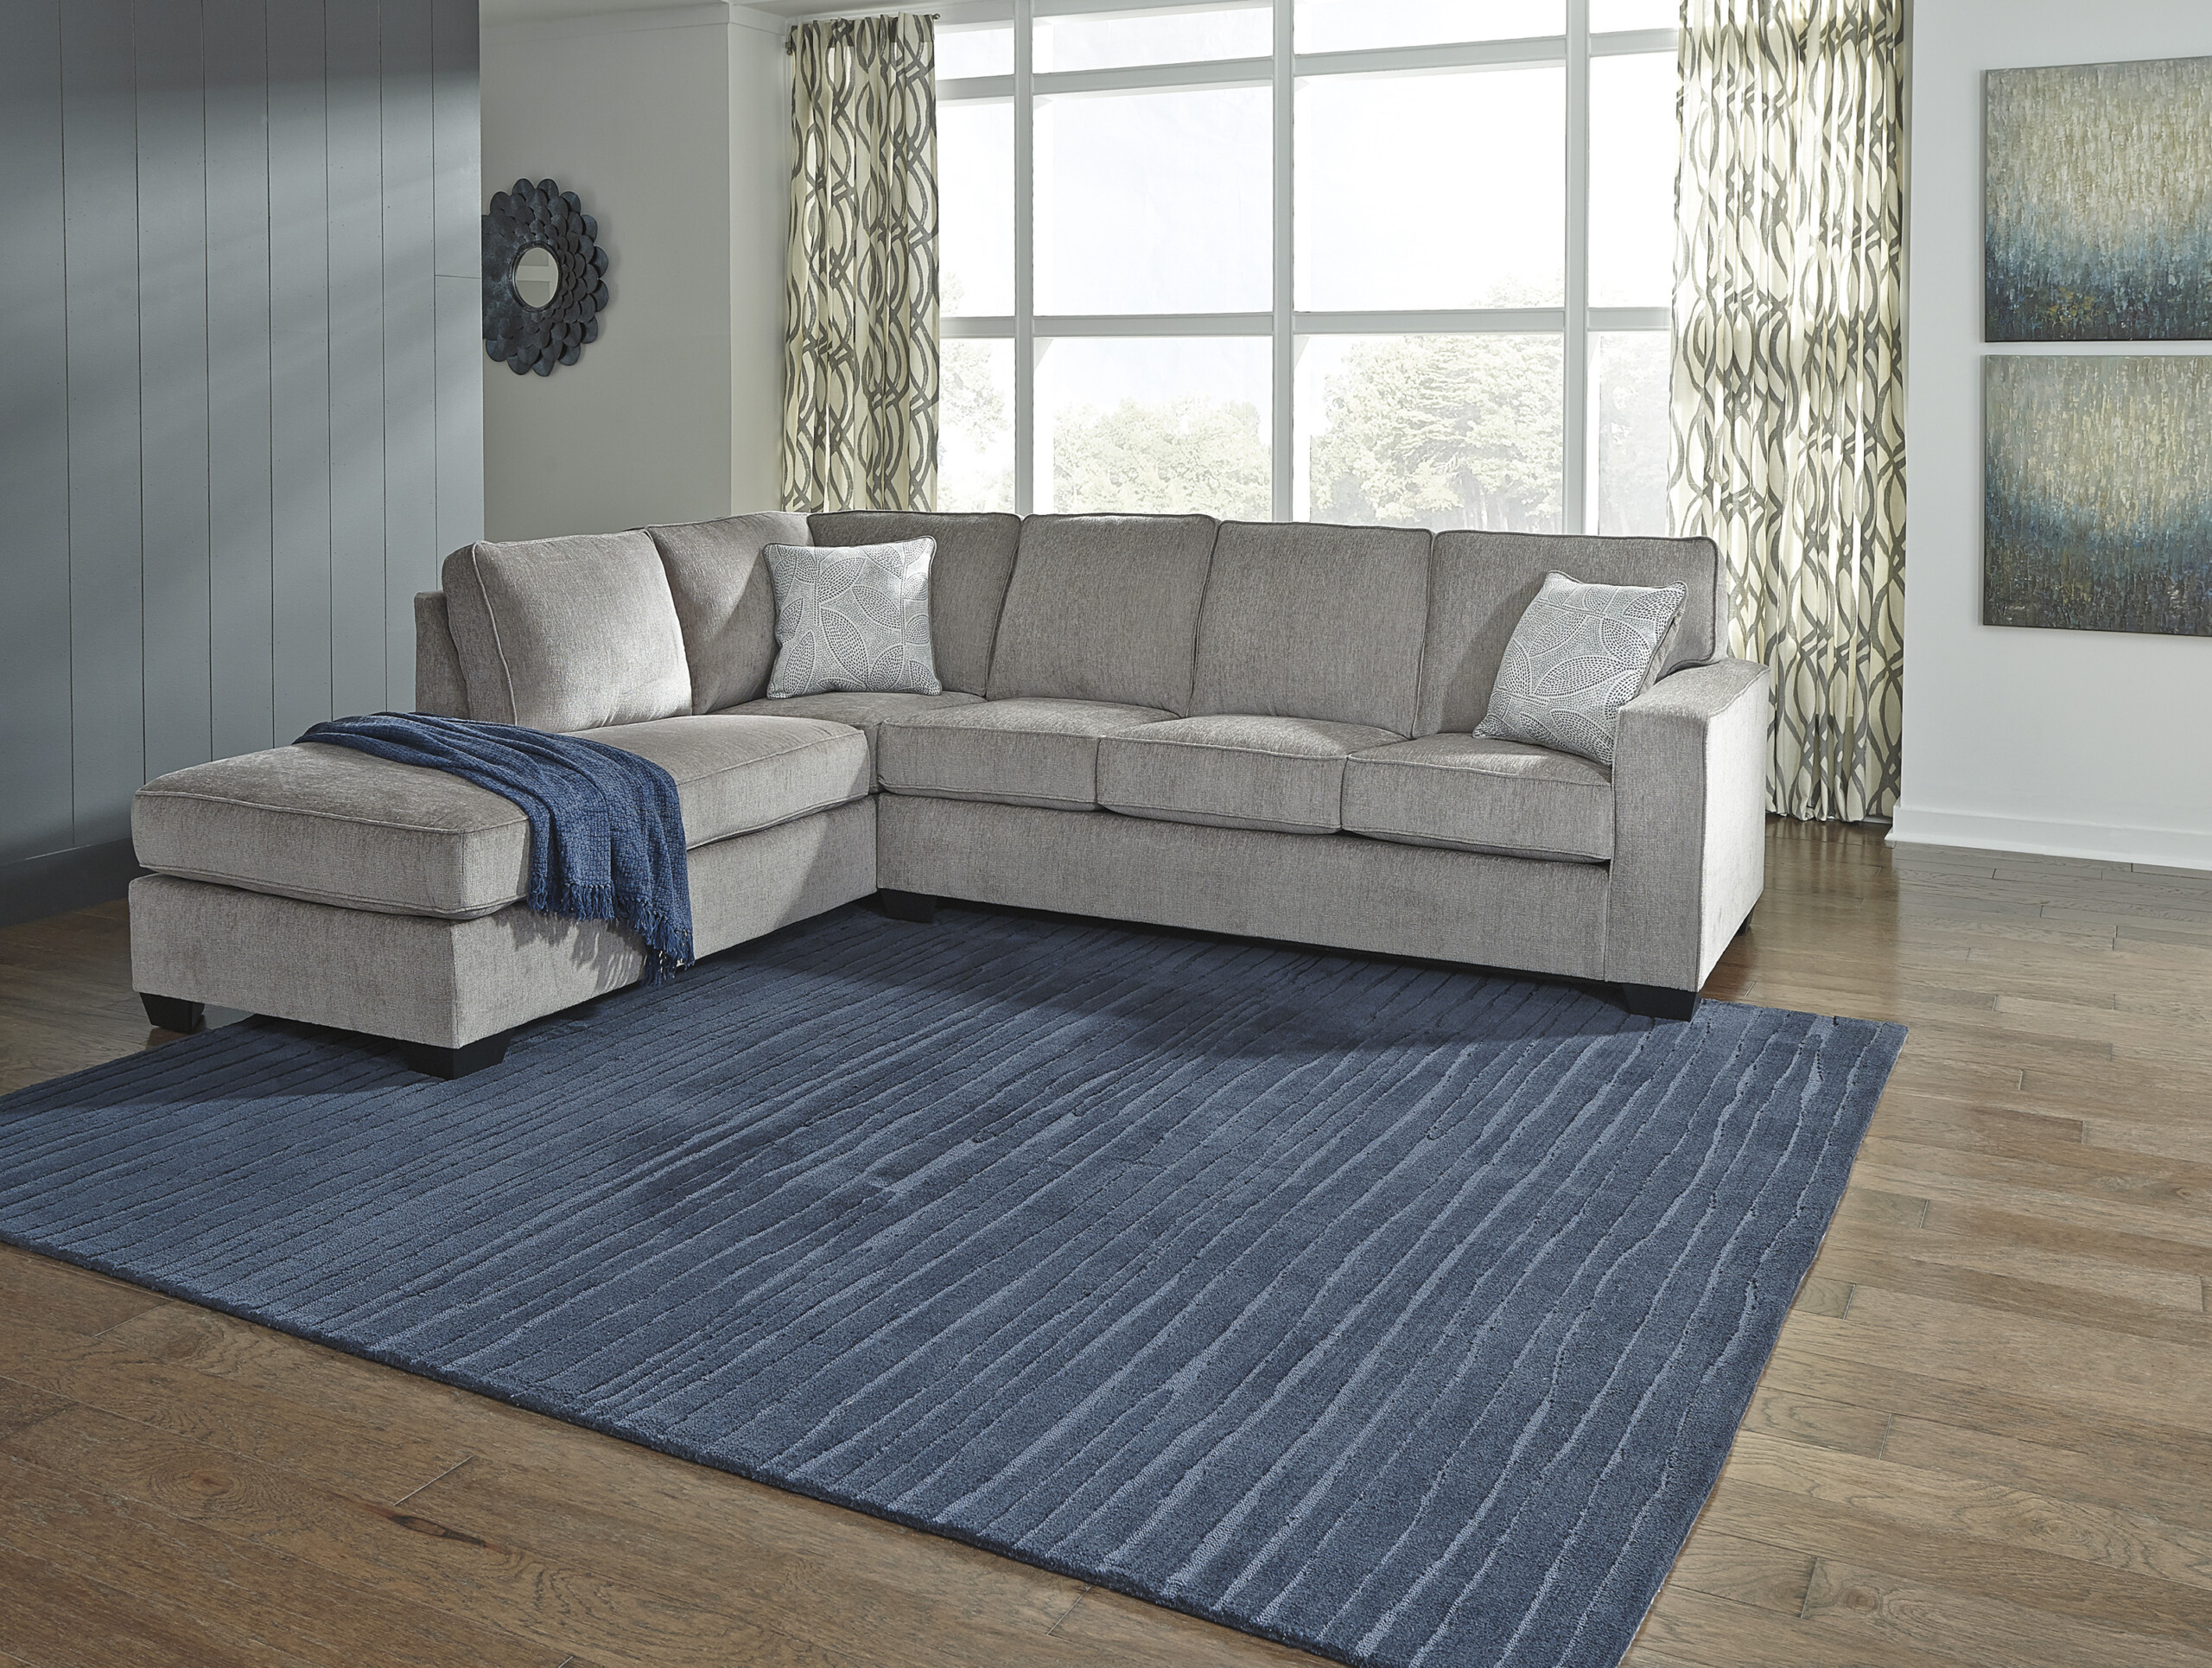 Altari Alloy Corner Chaise Sectional FREE DELIVERY Marjen Of Chicago